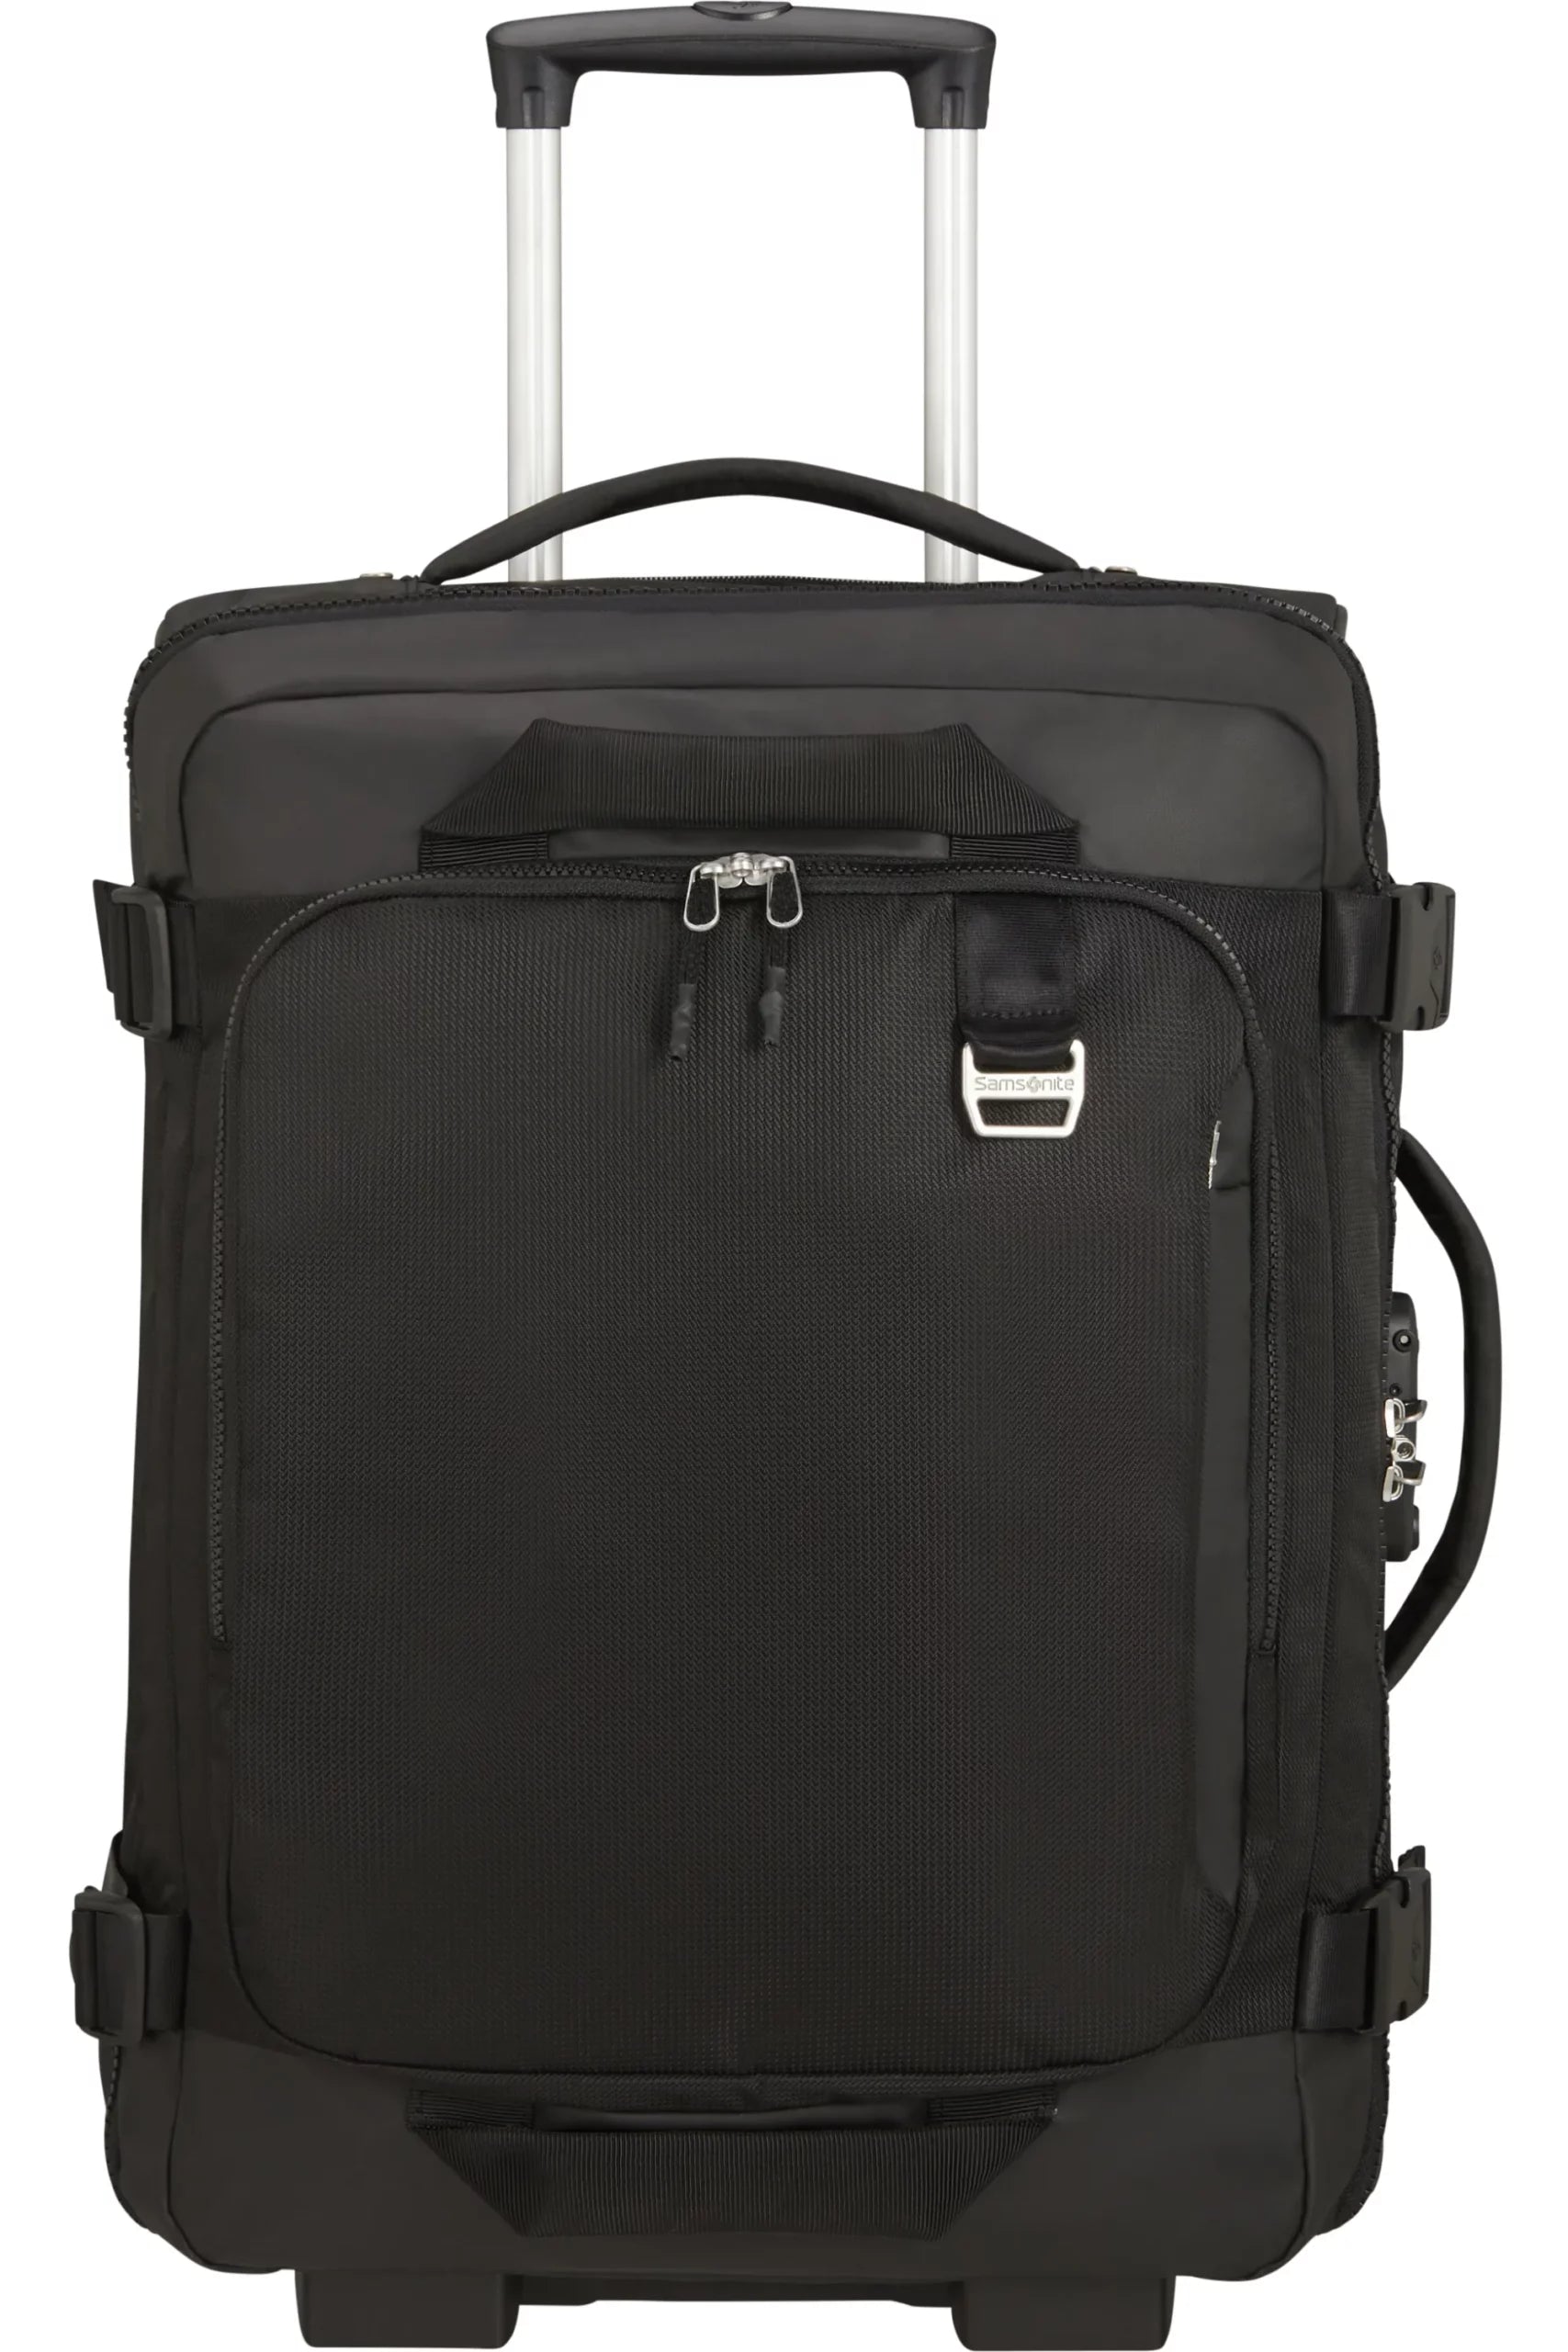 133849-1041-133849_1041_MIDTOWN_DUFFLEWH_5520_BACKPACK_FRONT-b9a75402-d770-4891-93a6-ab360094e3c7